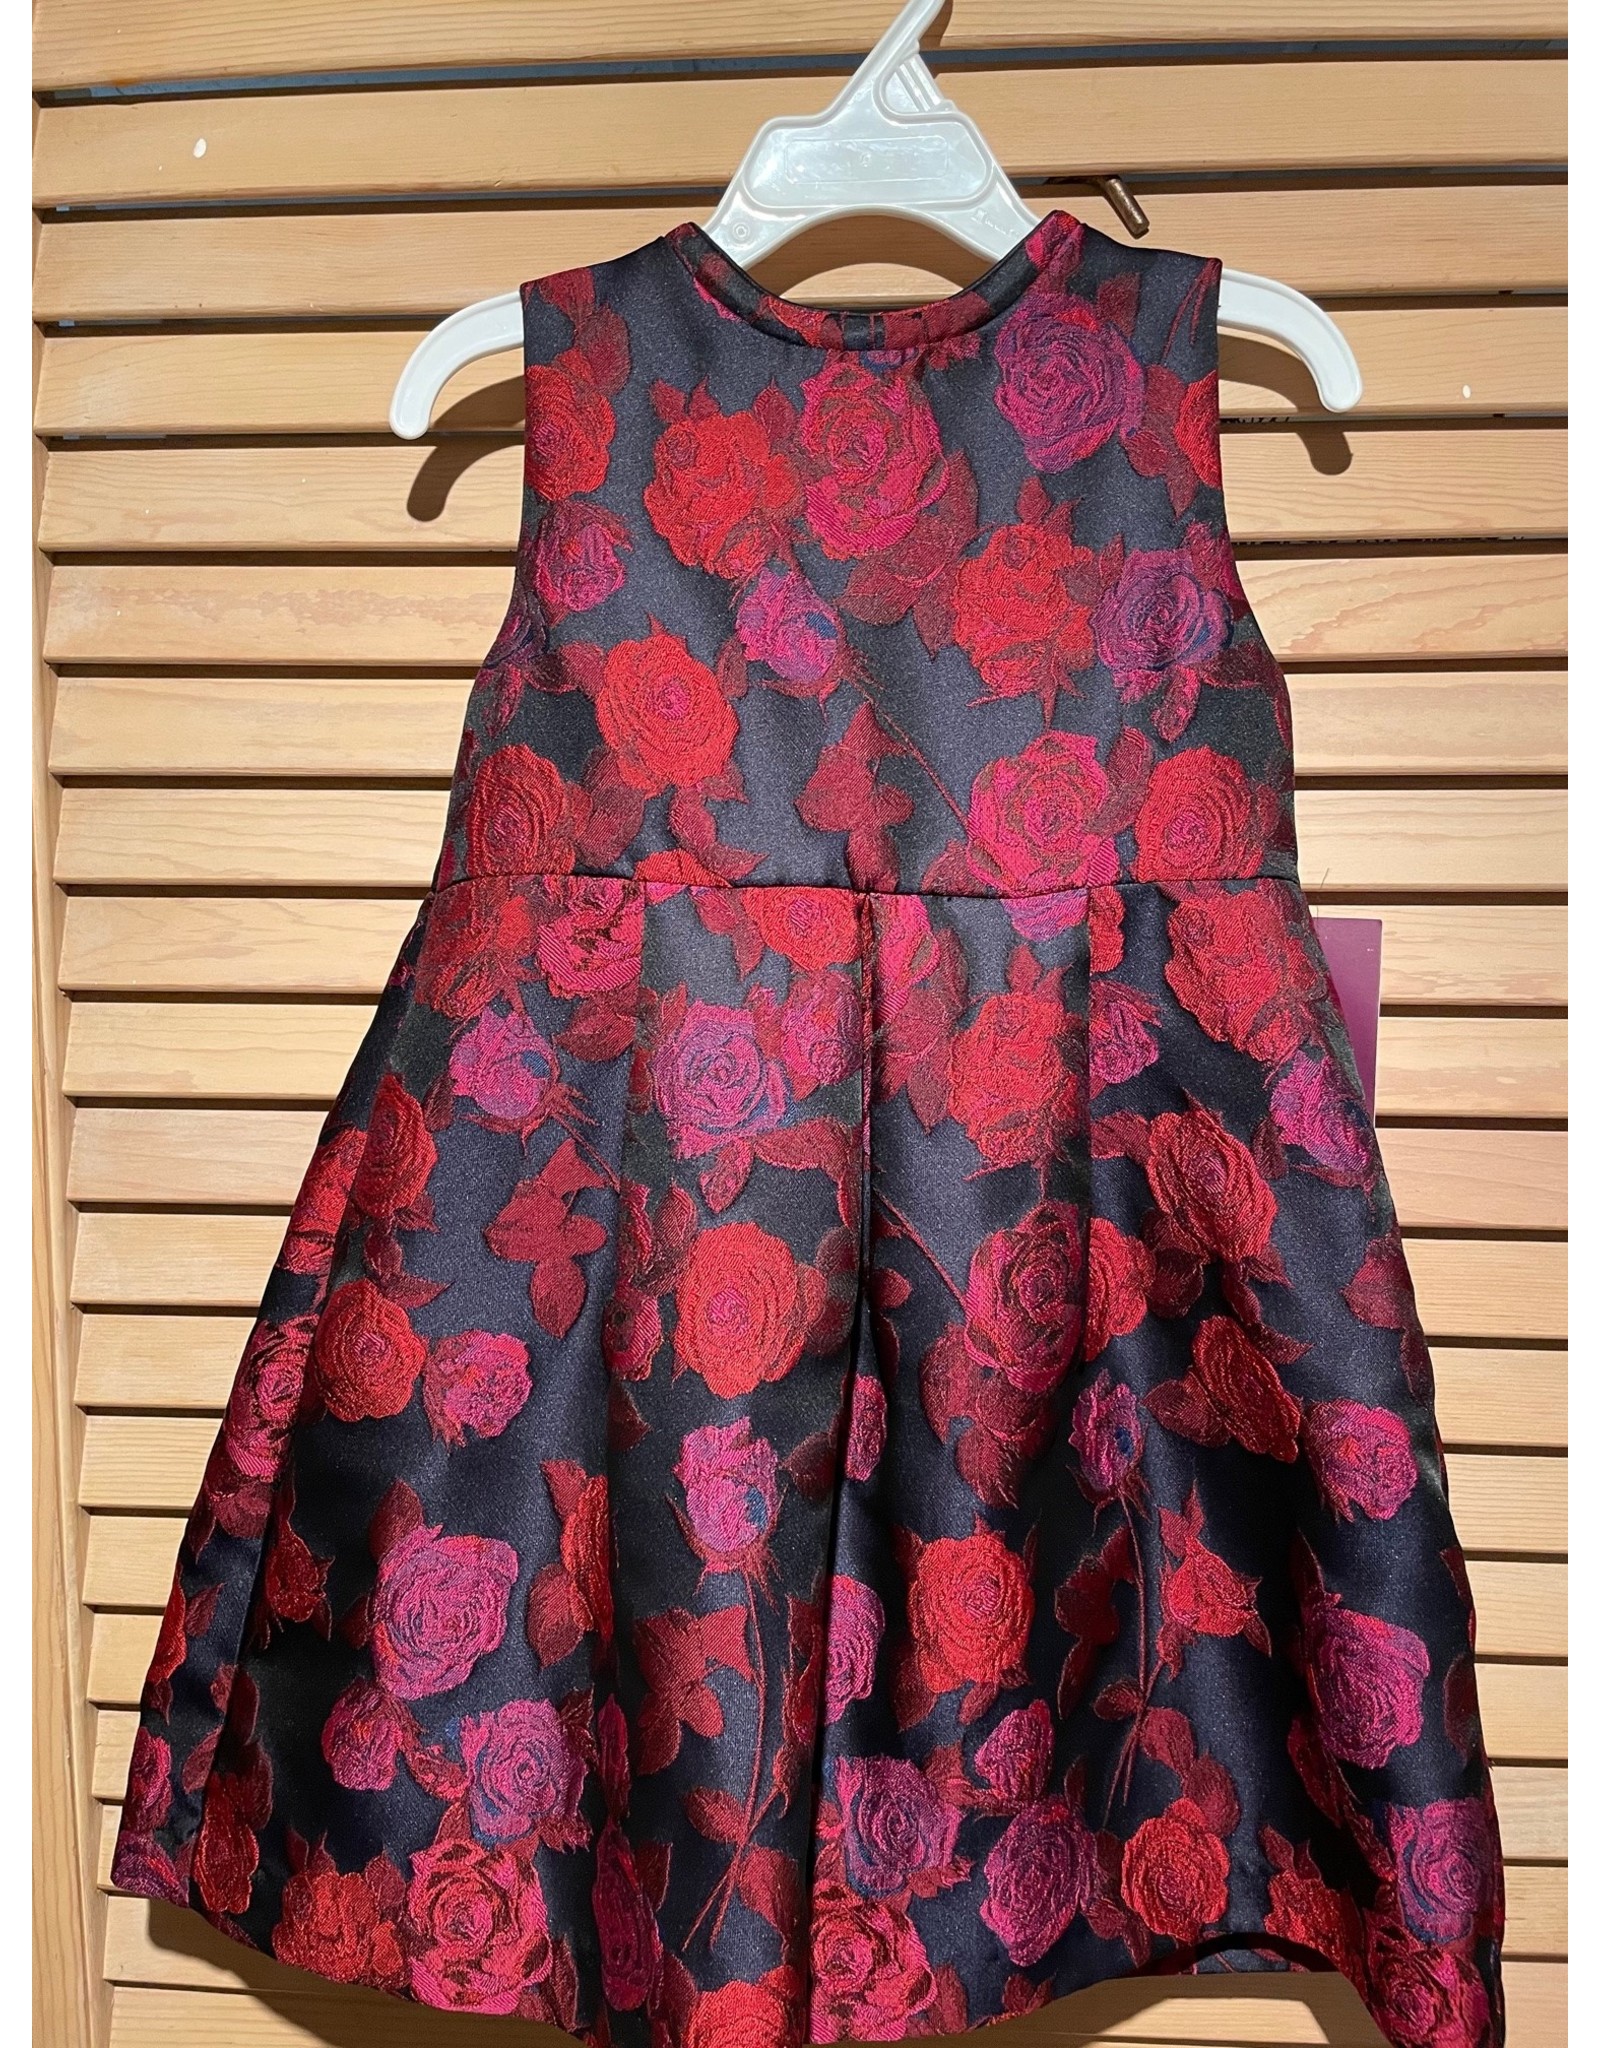 Gabby Black Dress with Roses